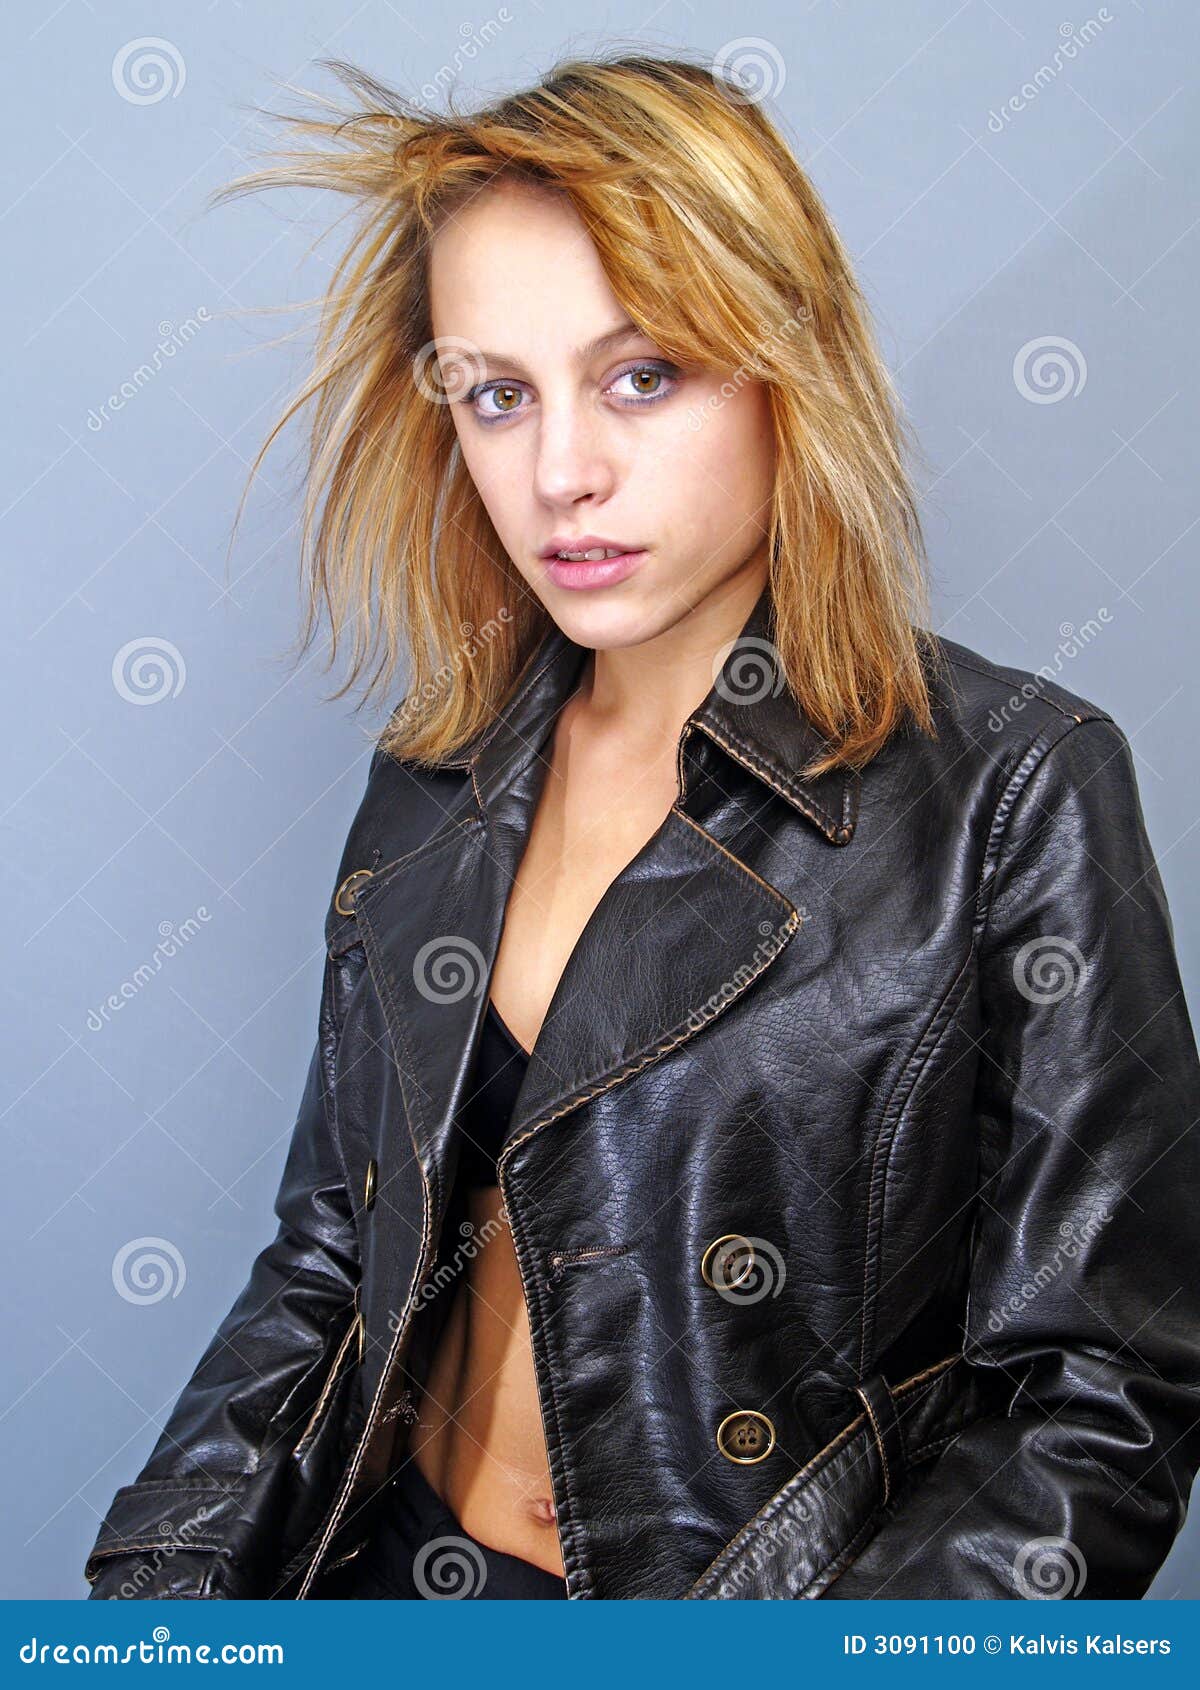 Women In Leather Stock Photo - Image: 3091100